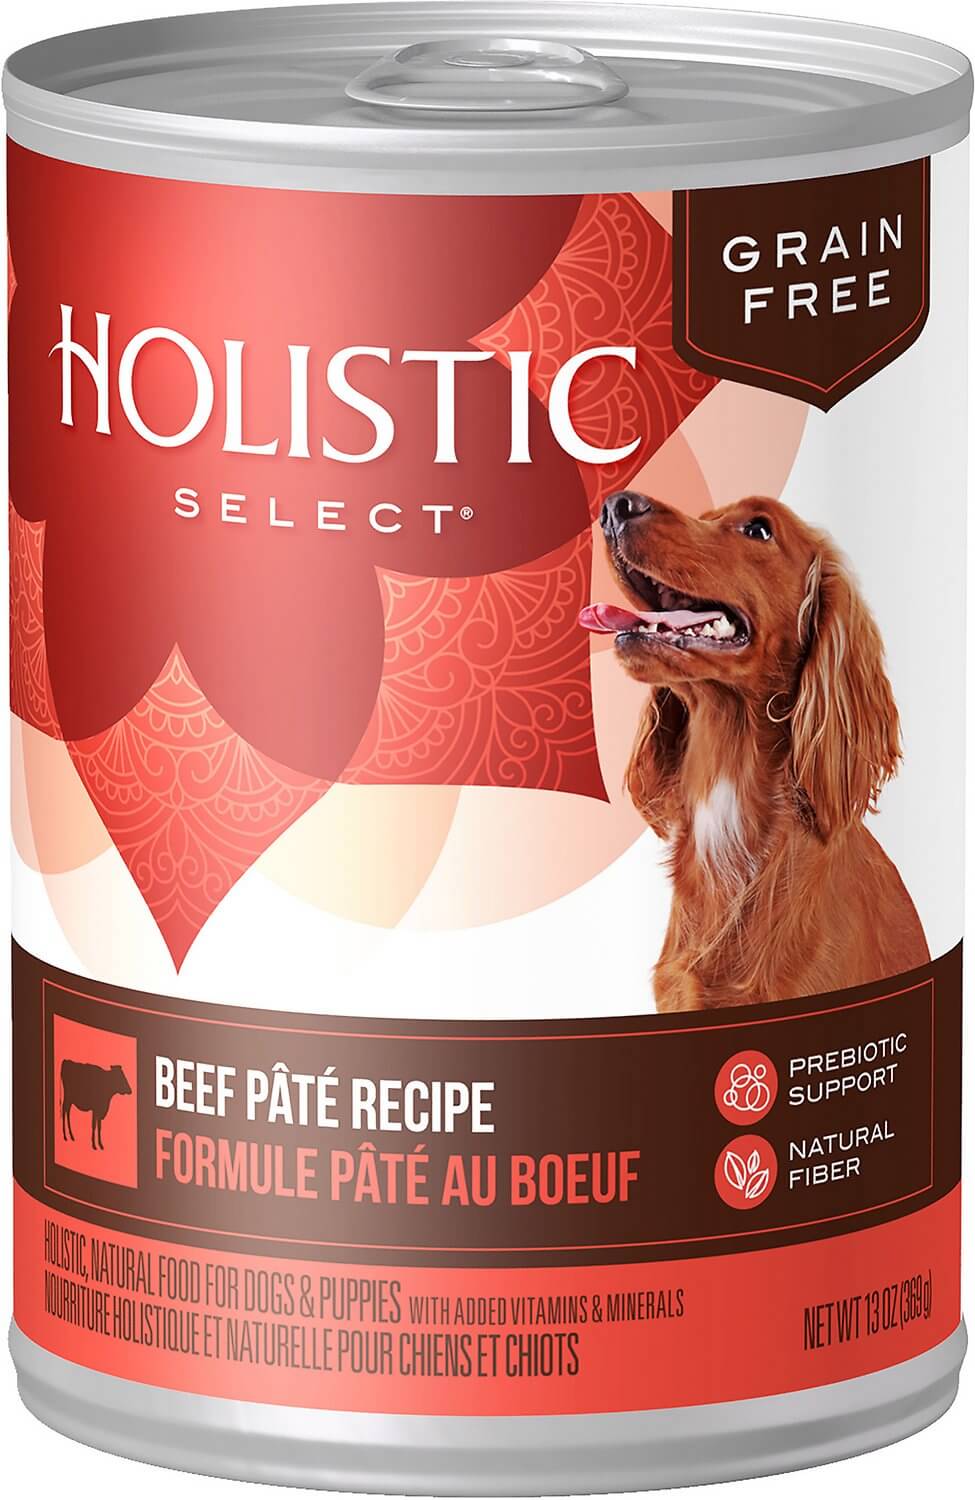 Holistic Select Grain Free Canned Dog Food Review